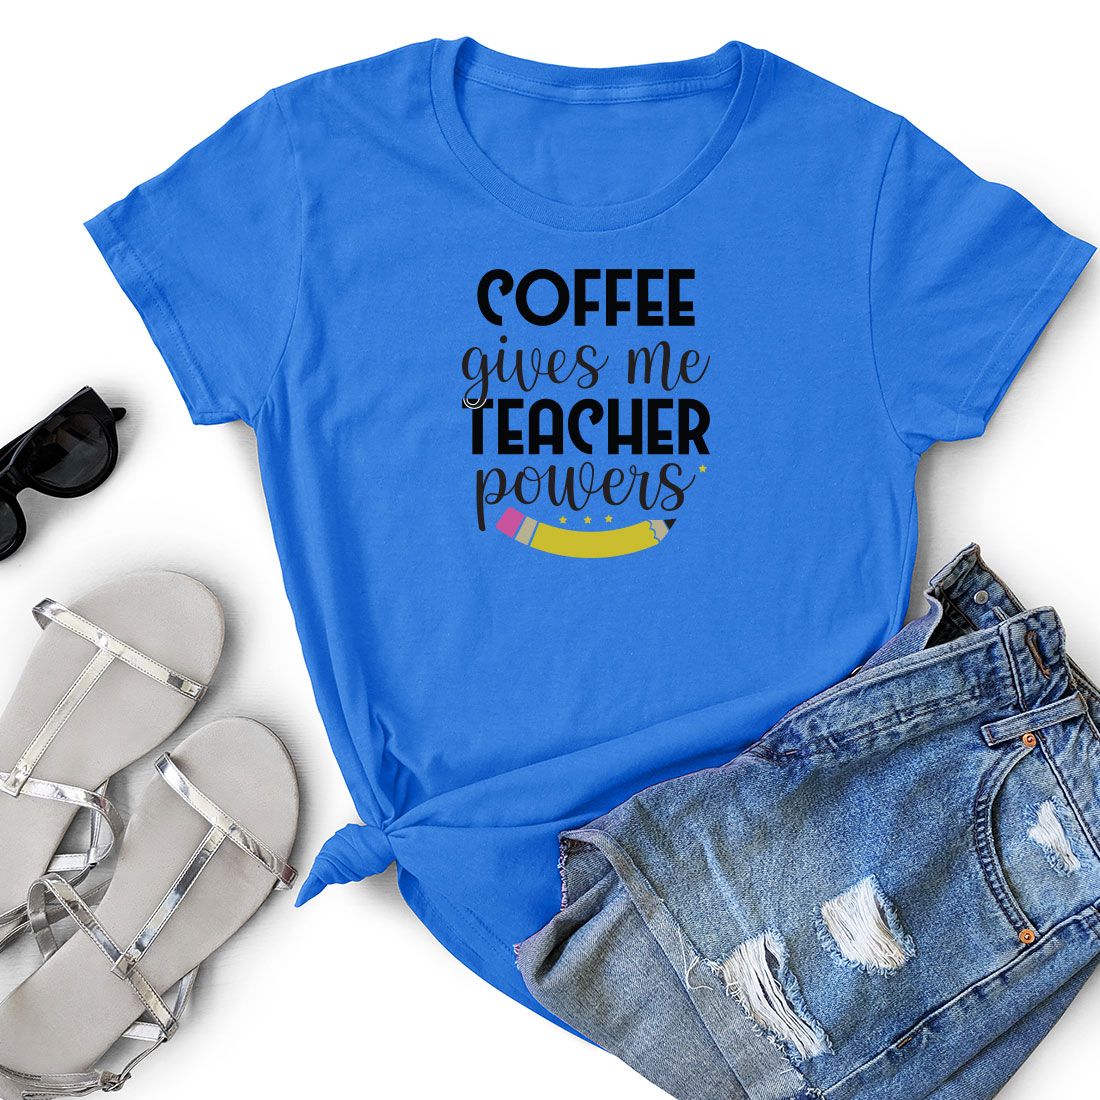 T - shirt that says coffee gives me teacher powers.